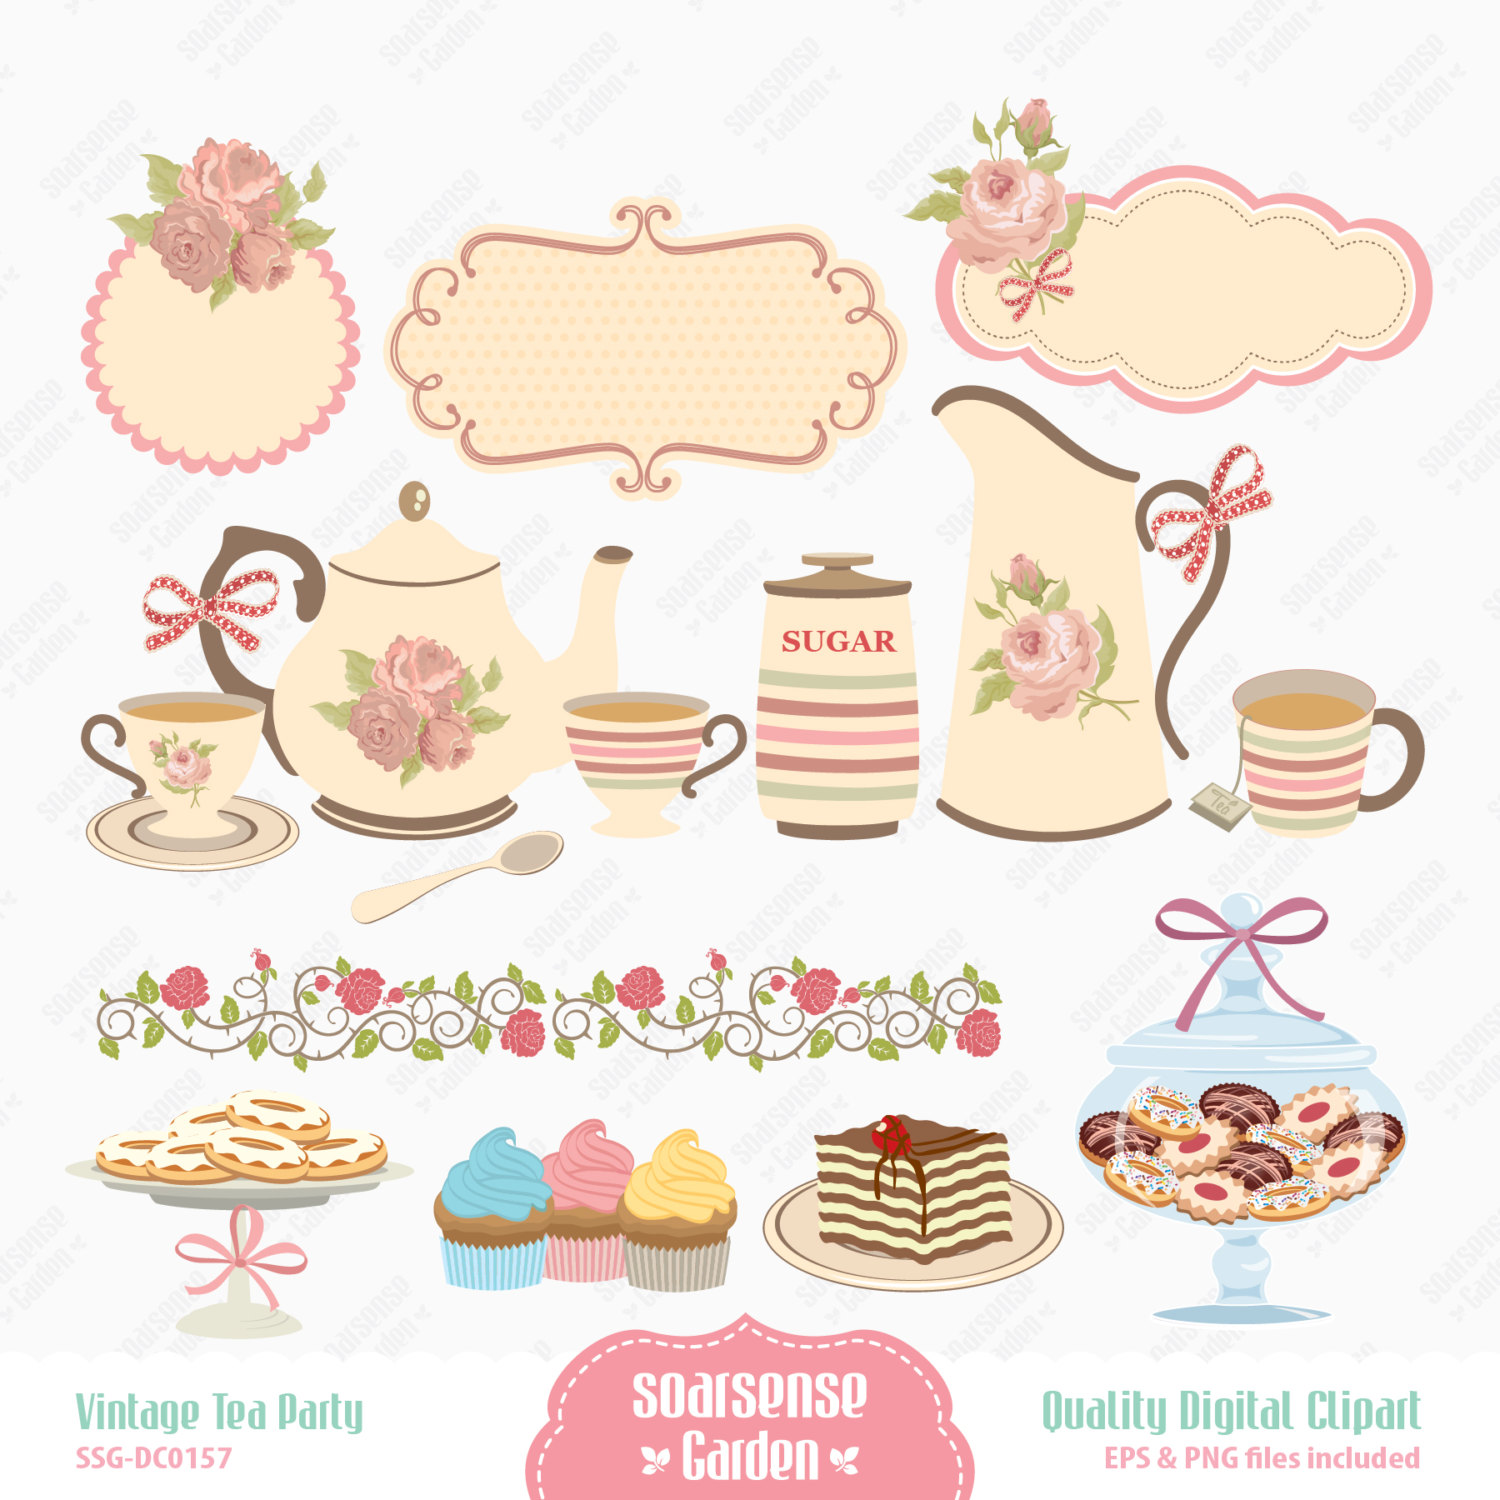 Tea Party 2.png ❤ liked on 